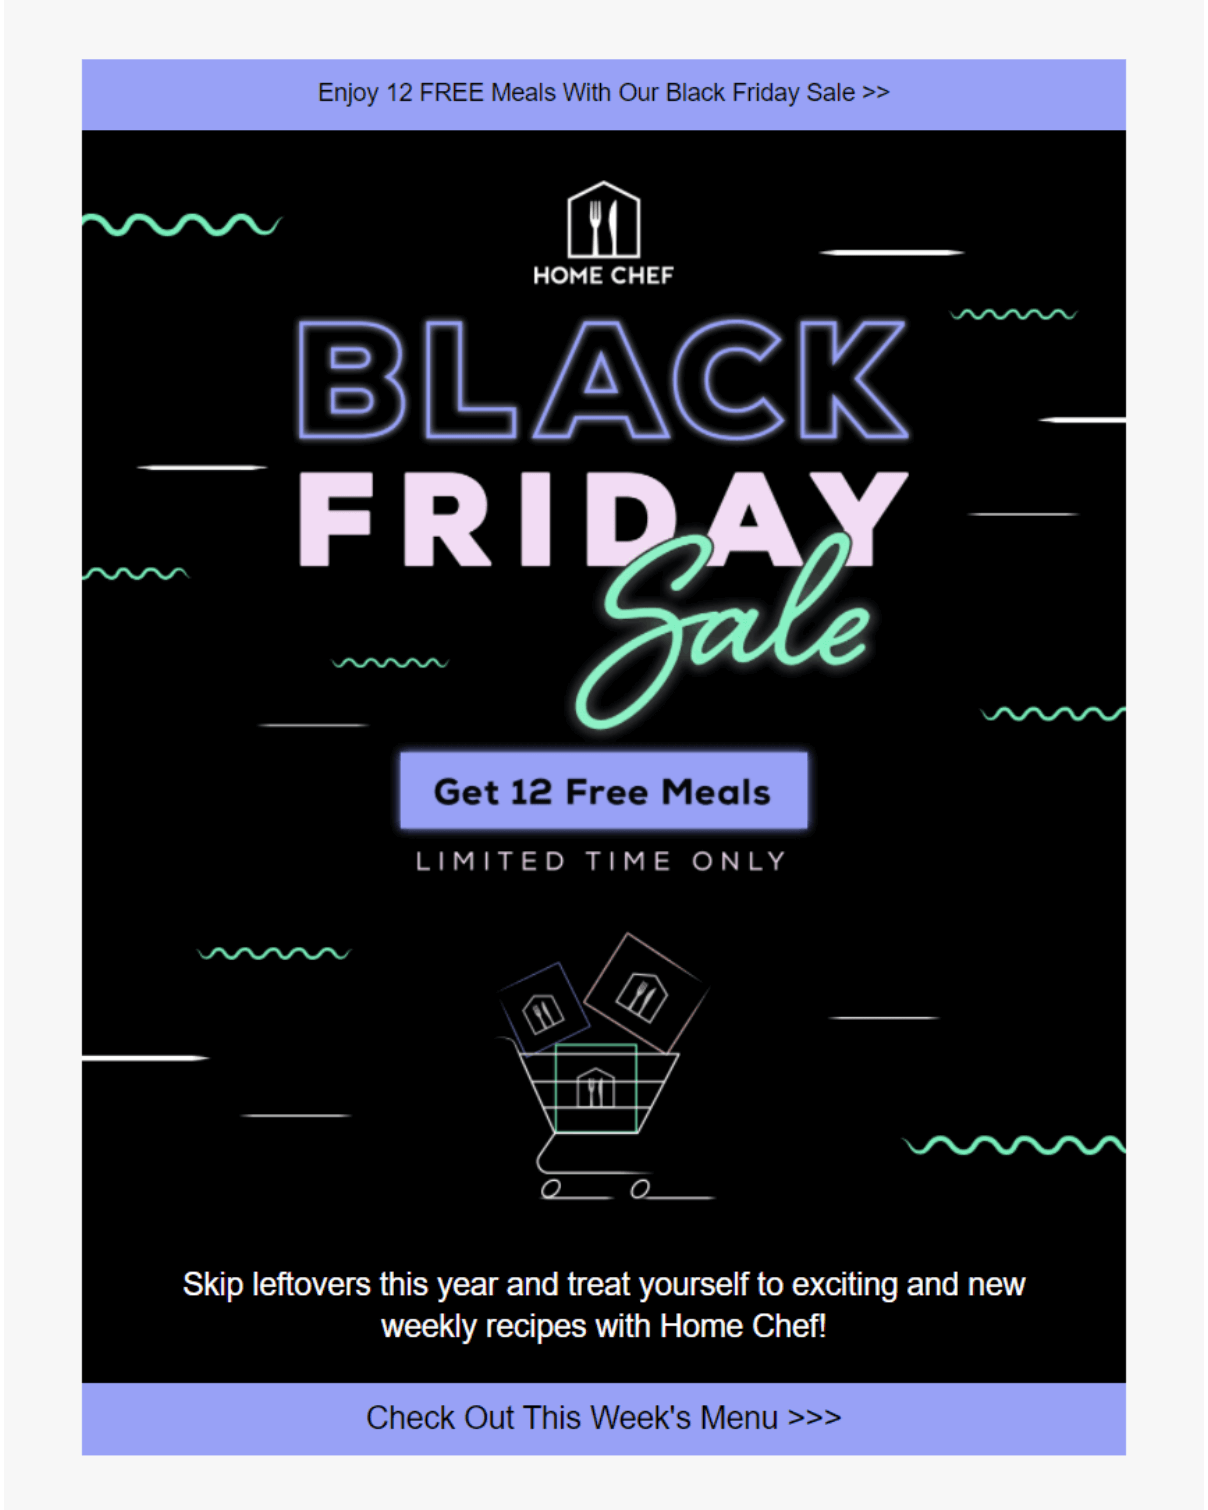 A Black Friday email from Home Chef offering a "Get 12 meals free" promotion